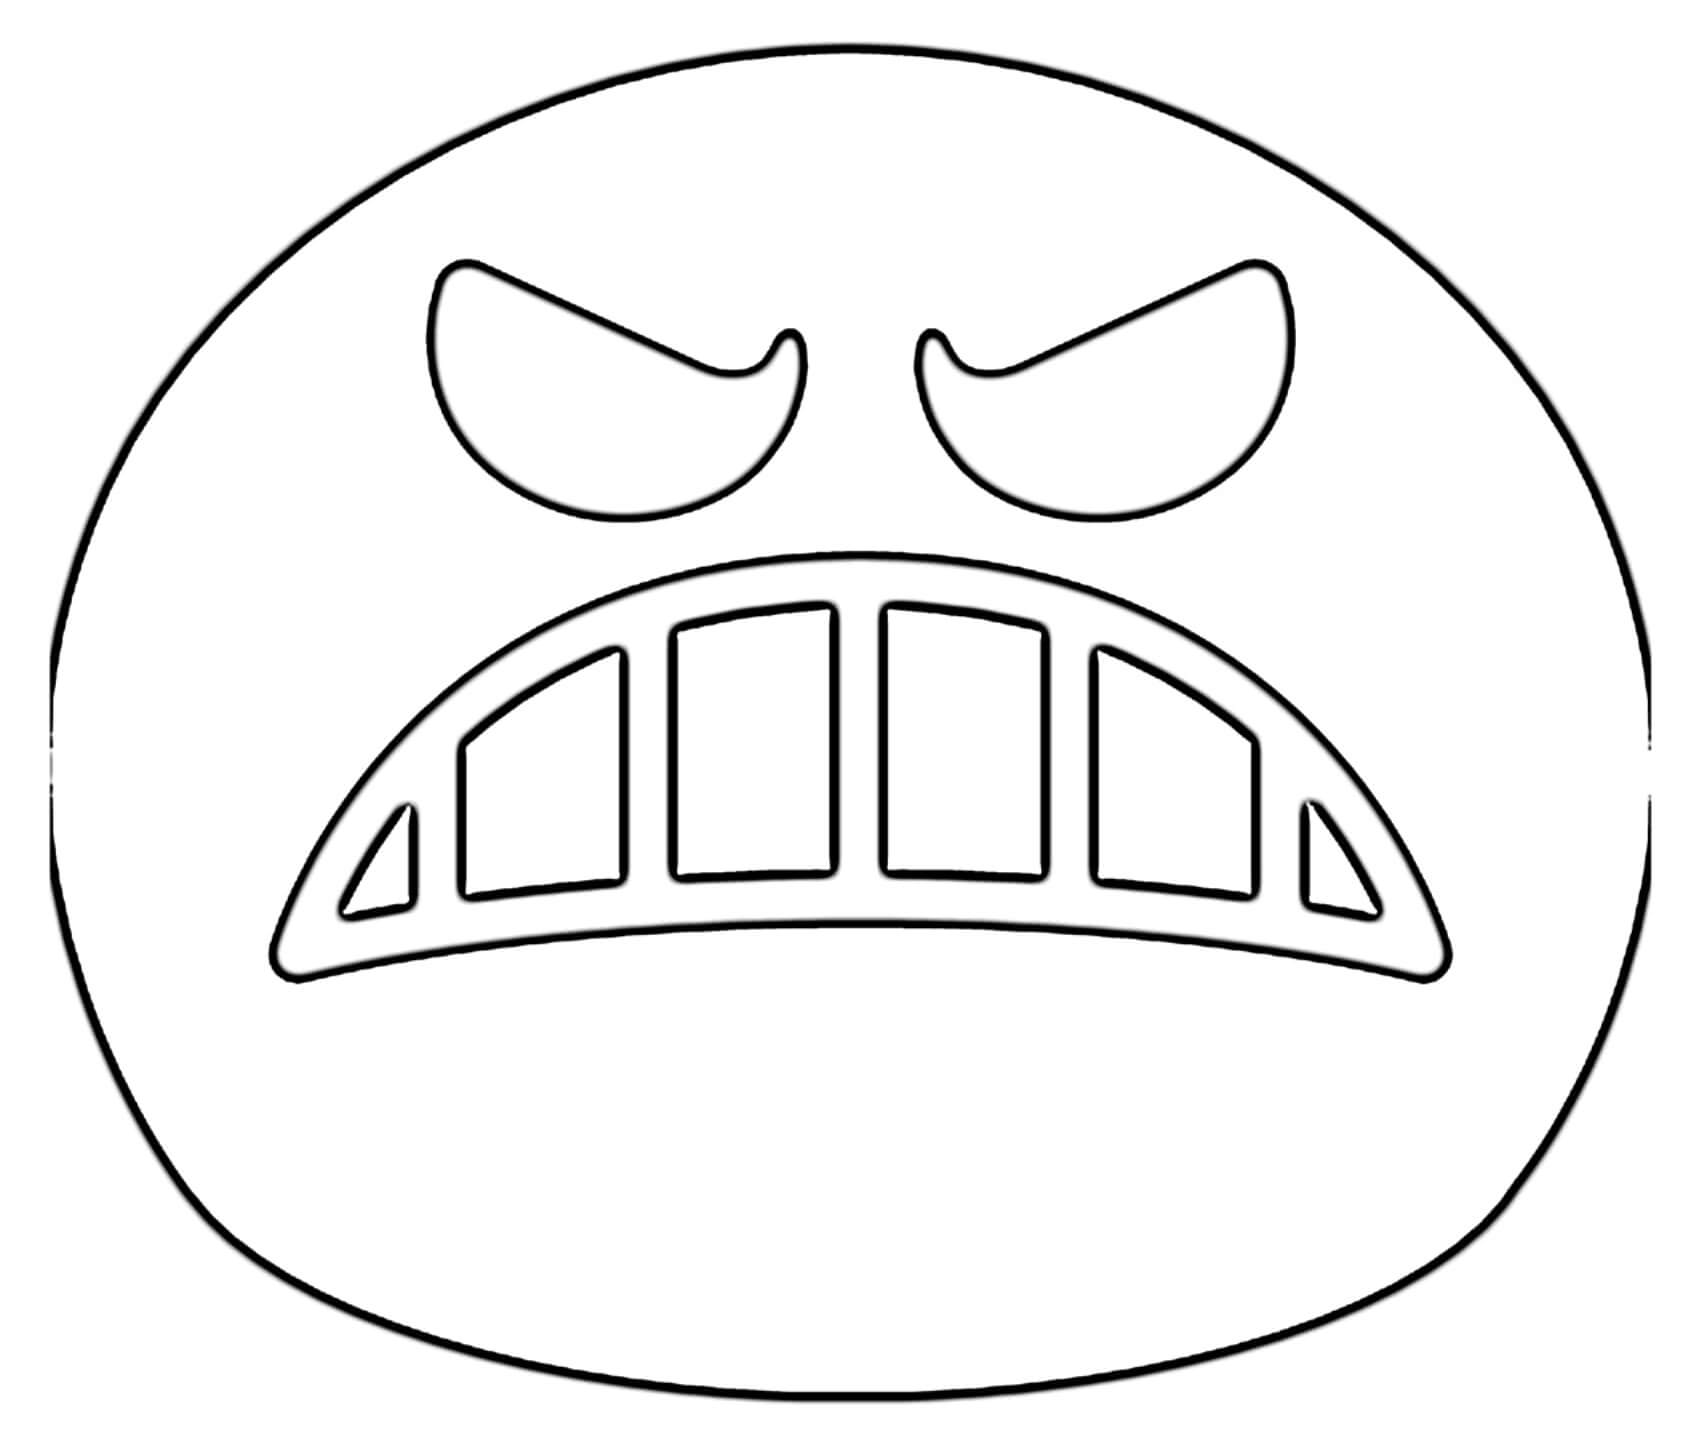 Google Emoji Angry Face Coloring Page